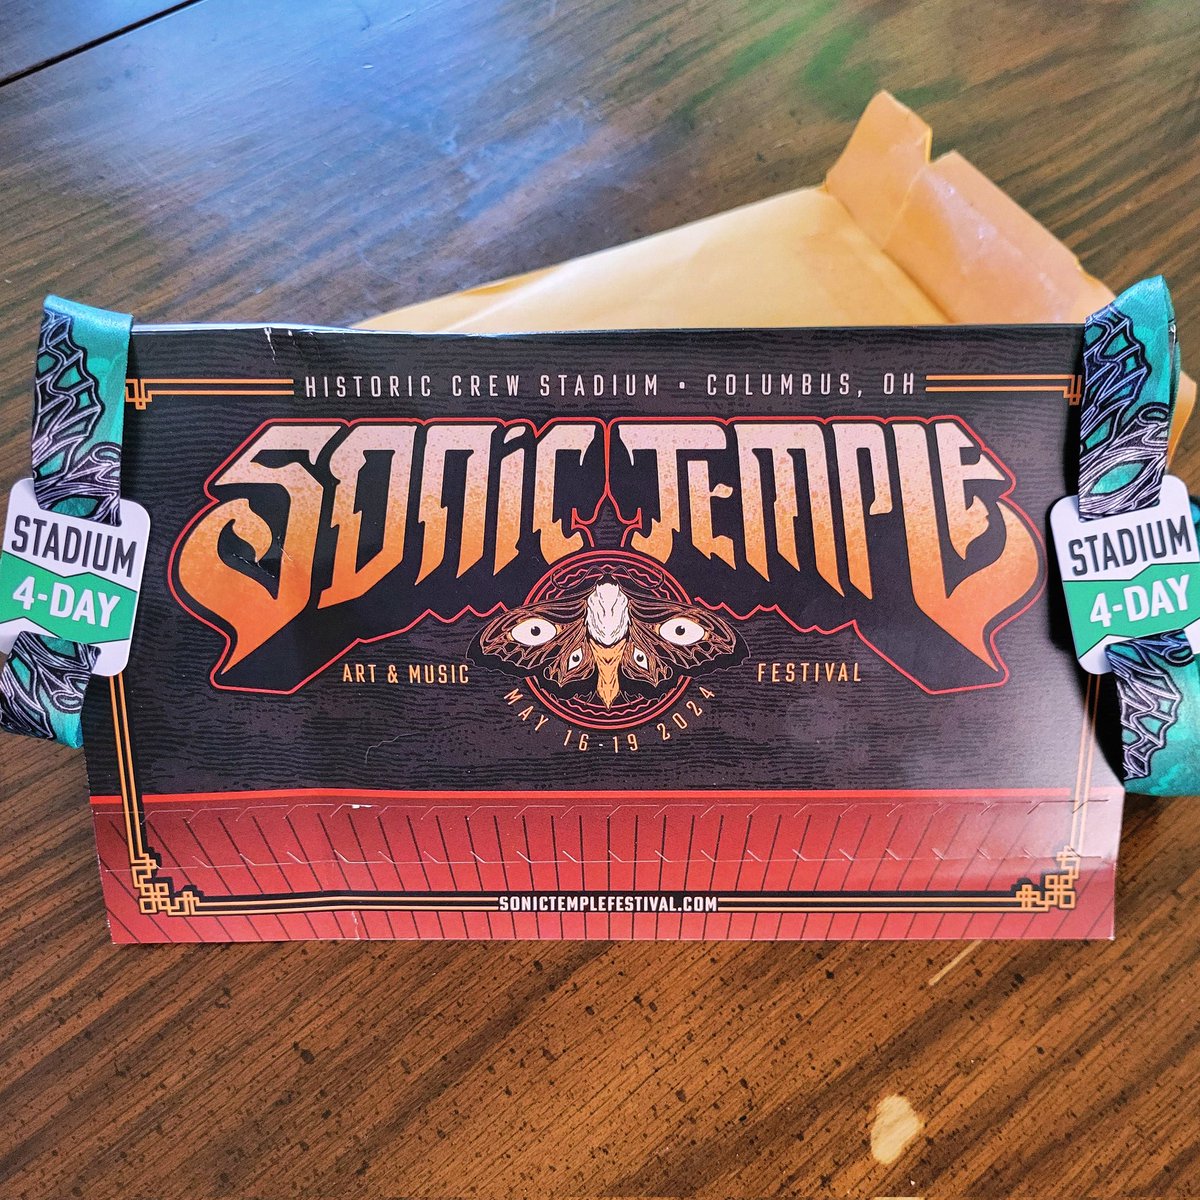 YAY!!!!! Hubby and I got our @SonicTempleFest wristband tickets! So freaking excited! All this just so I could see @BlindChannelFIN in person FINALLY. 😁😉 Can't wait!